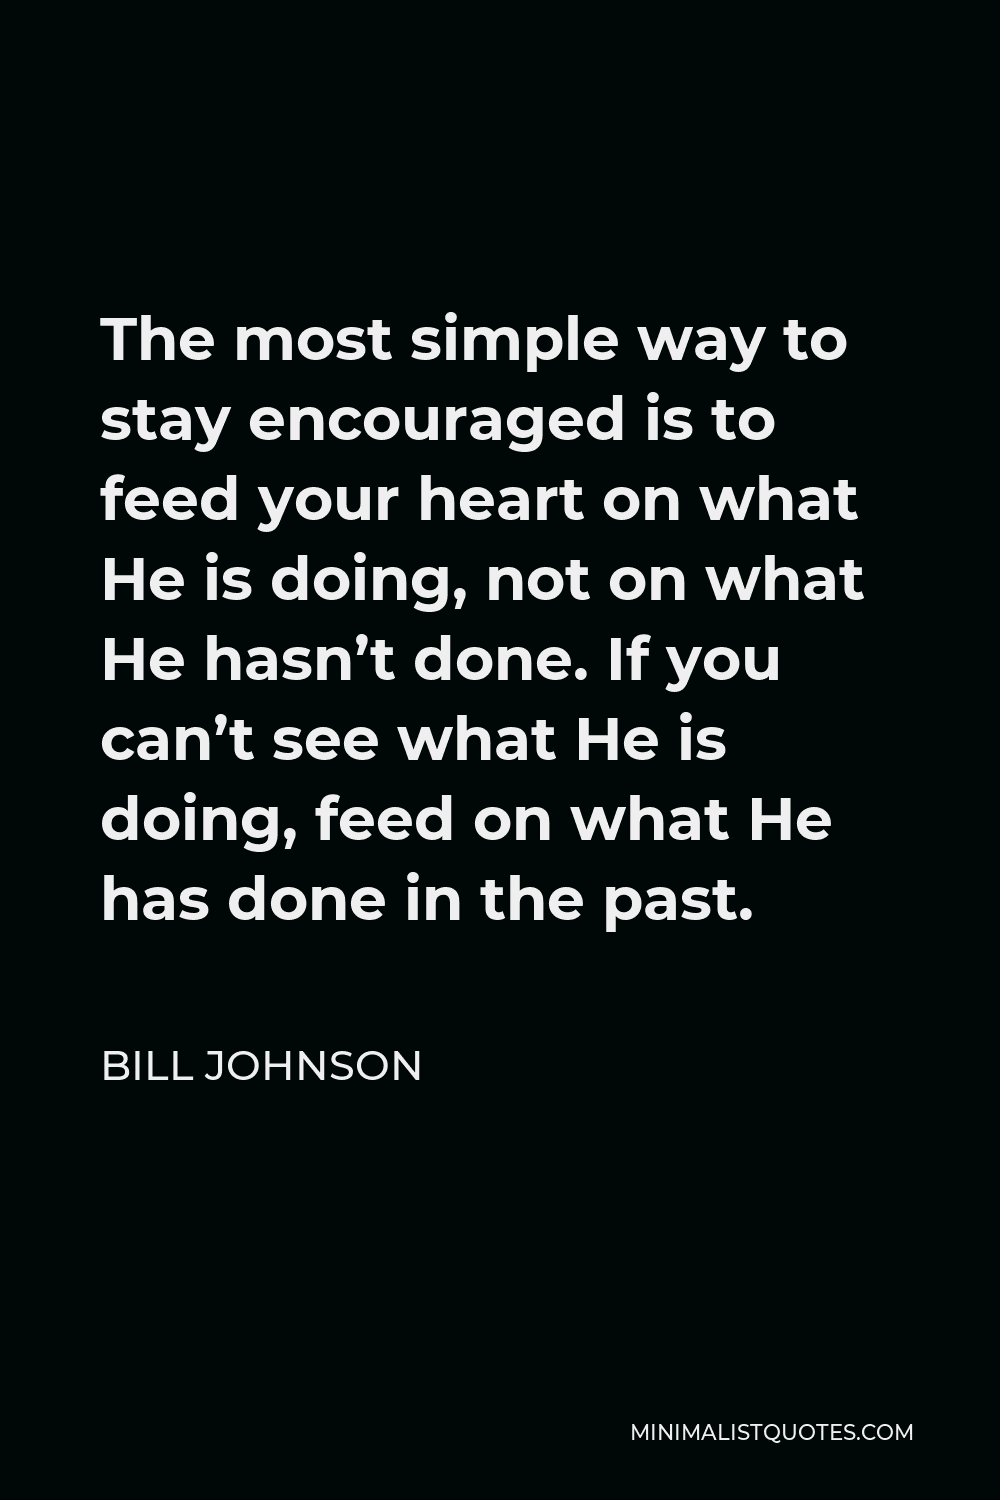 Bill Johnson Quote - The most simple way to stay encouraged is to feed your heart on what He is doing, not on what He hasn’t done. If you can’t see what He is doing, feed on what He has done in the past.